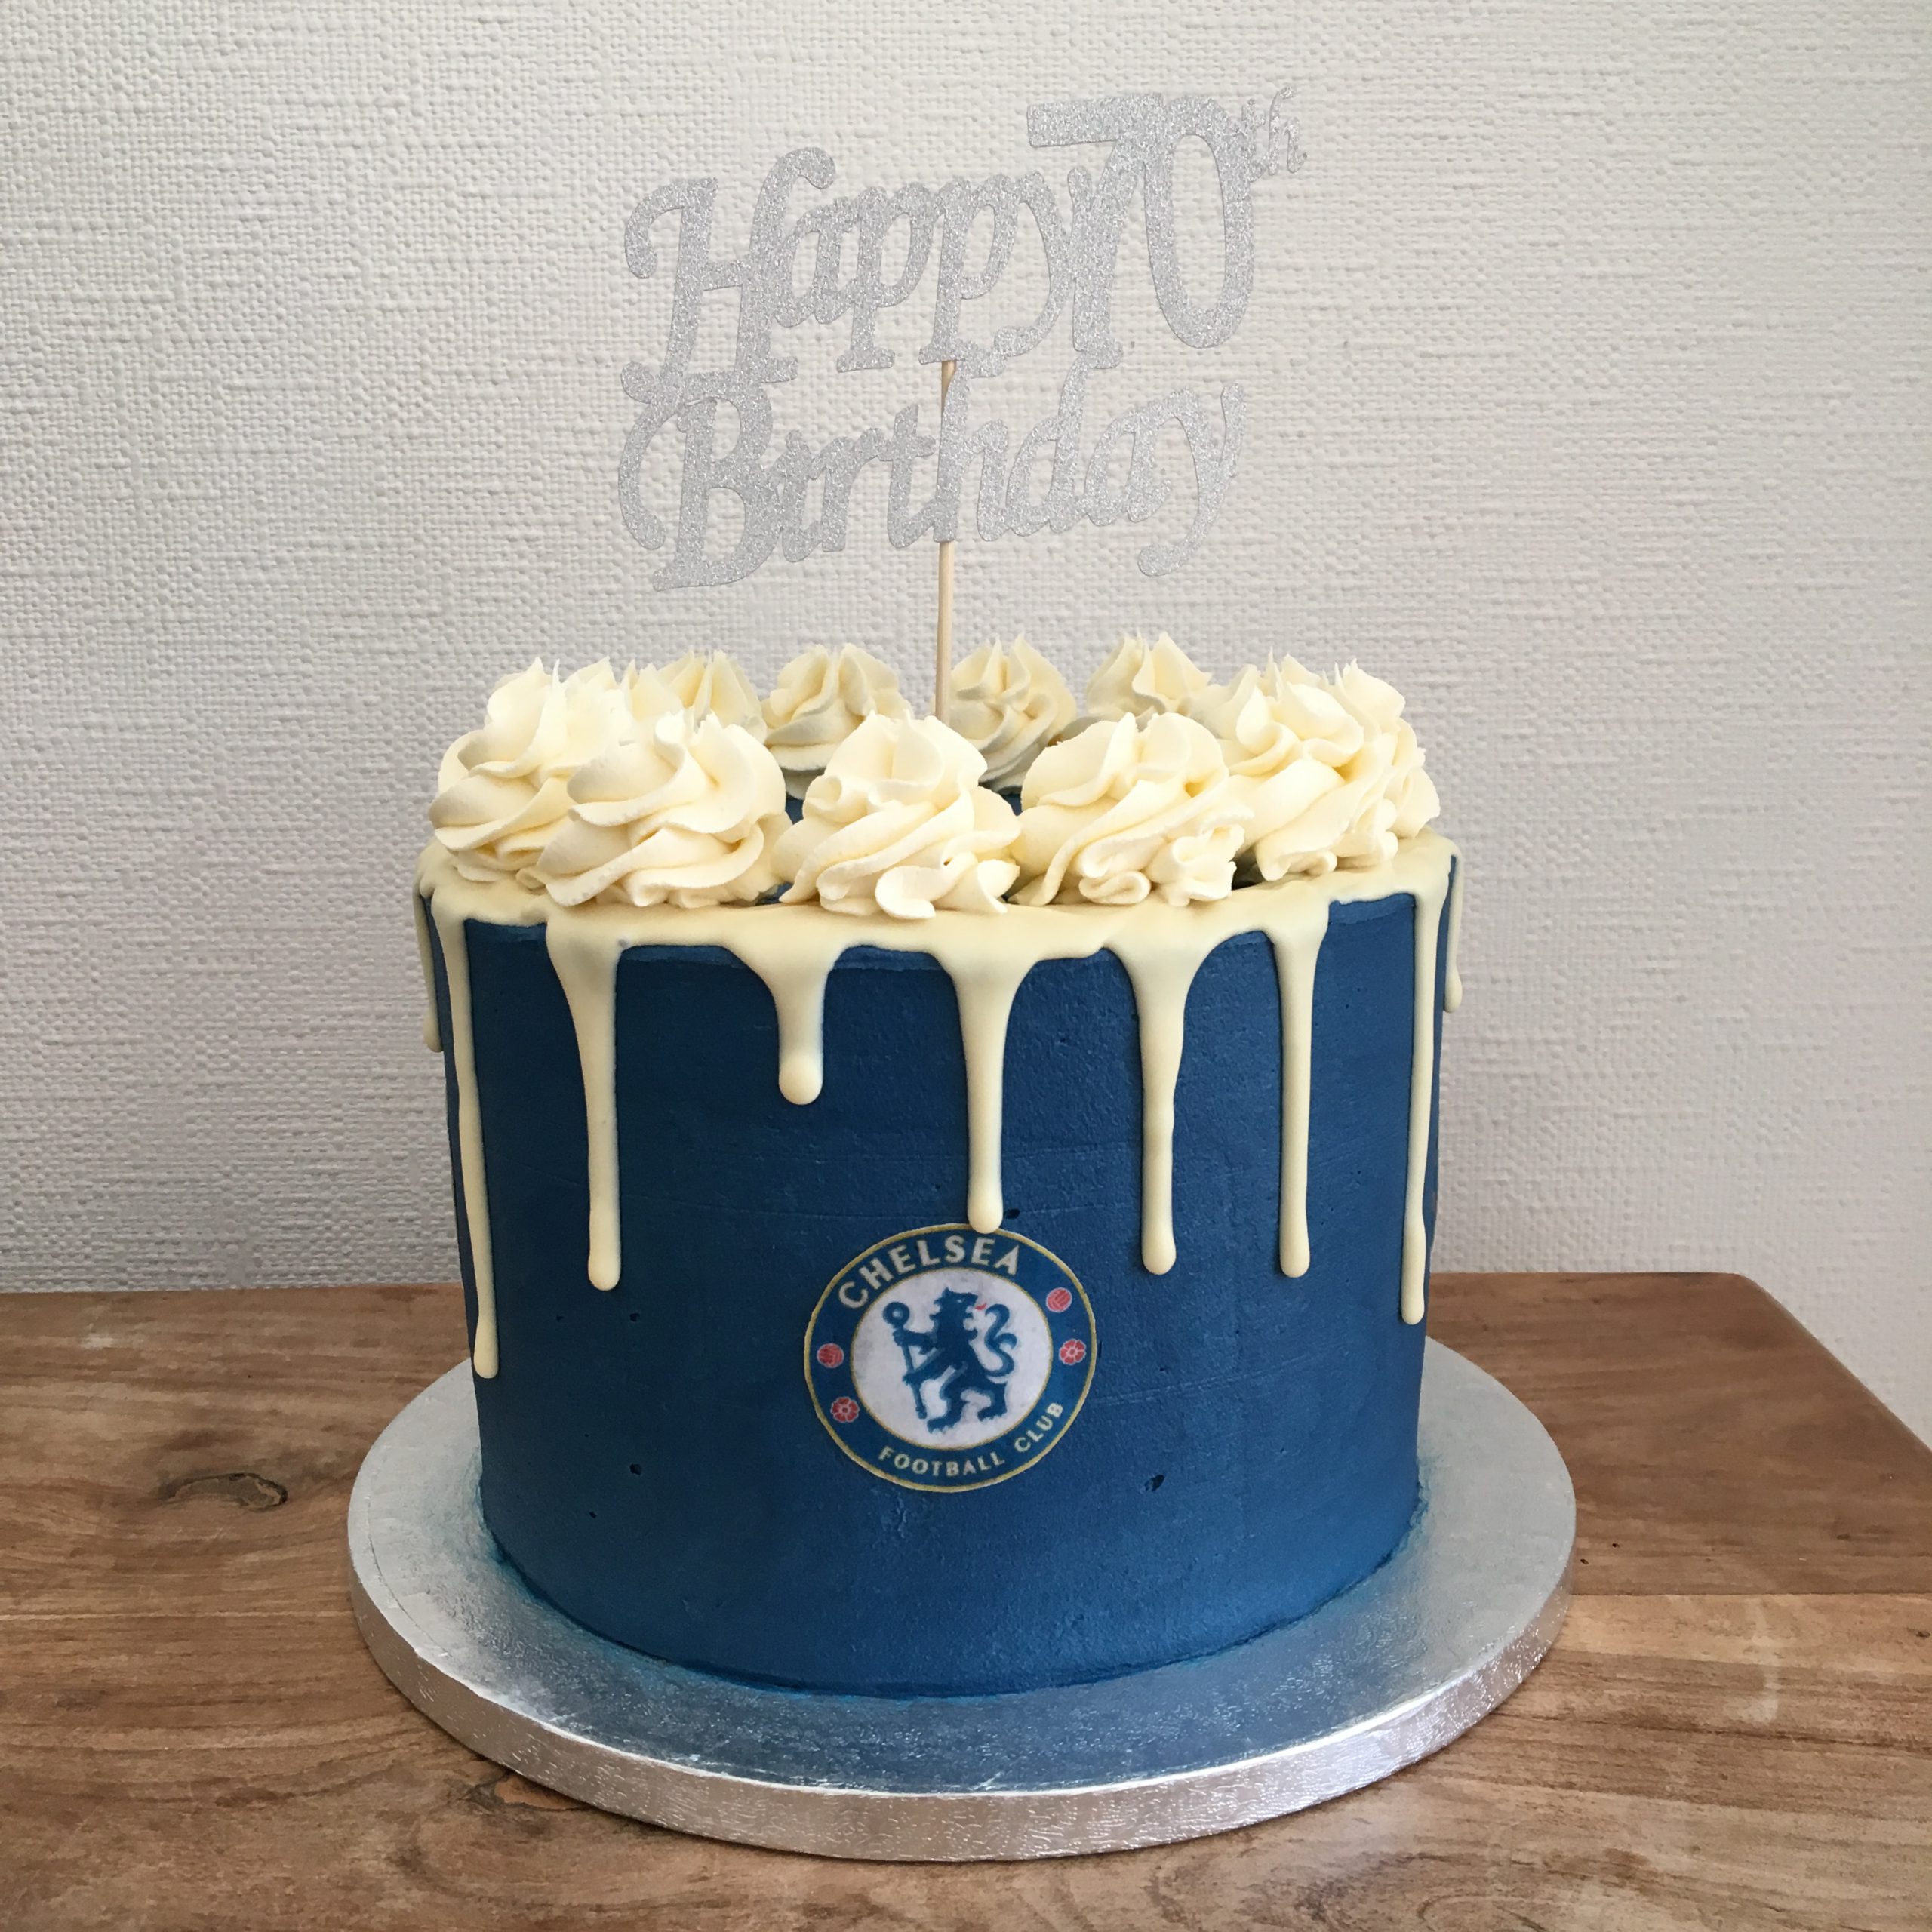 Chelsea Fan Truffle Cake Delivery in Singapore - FNP SG